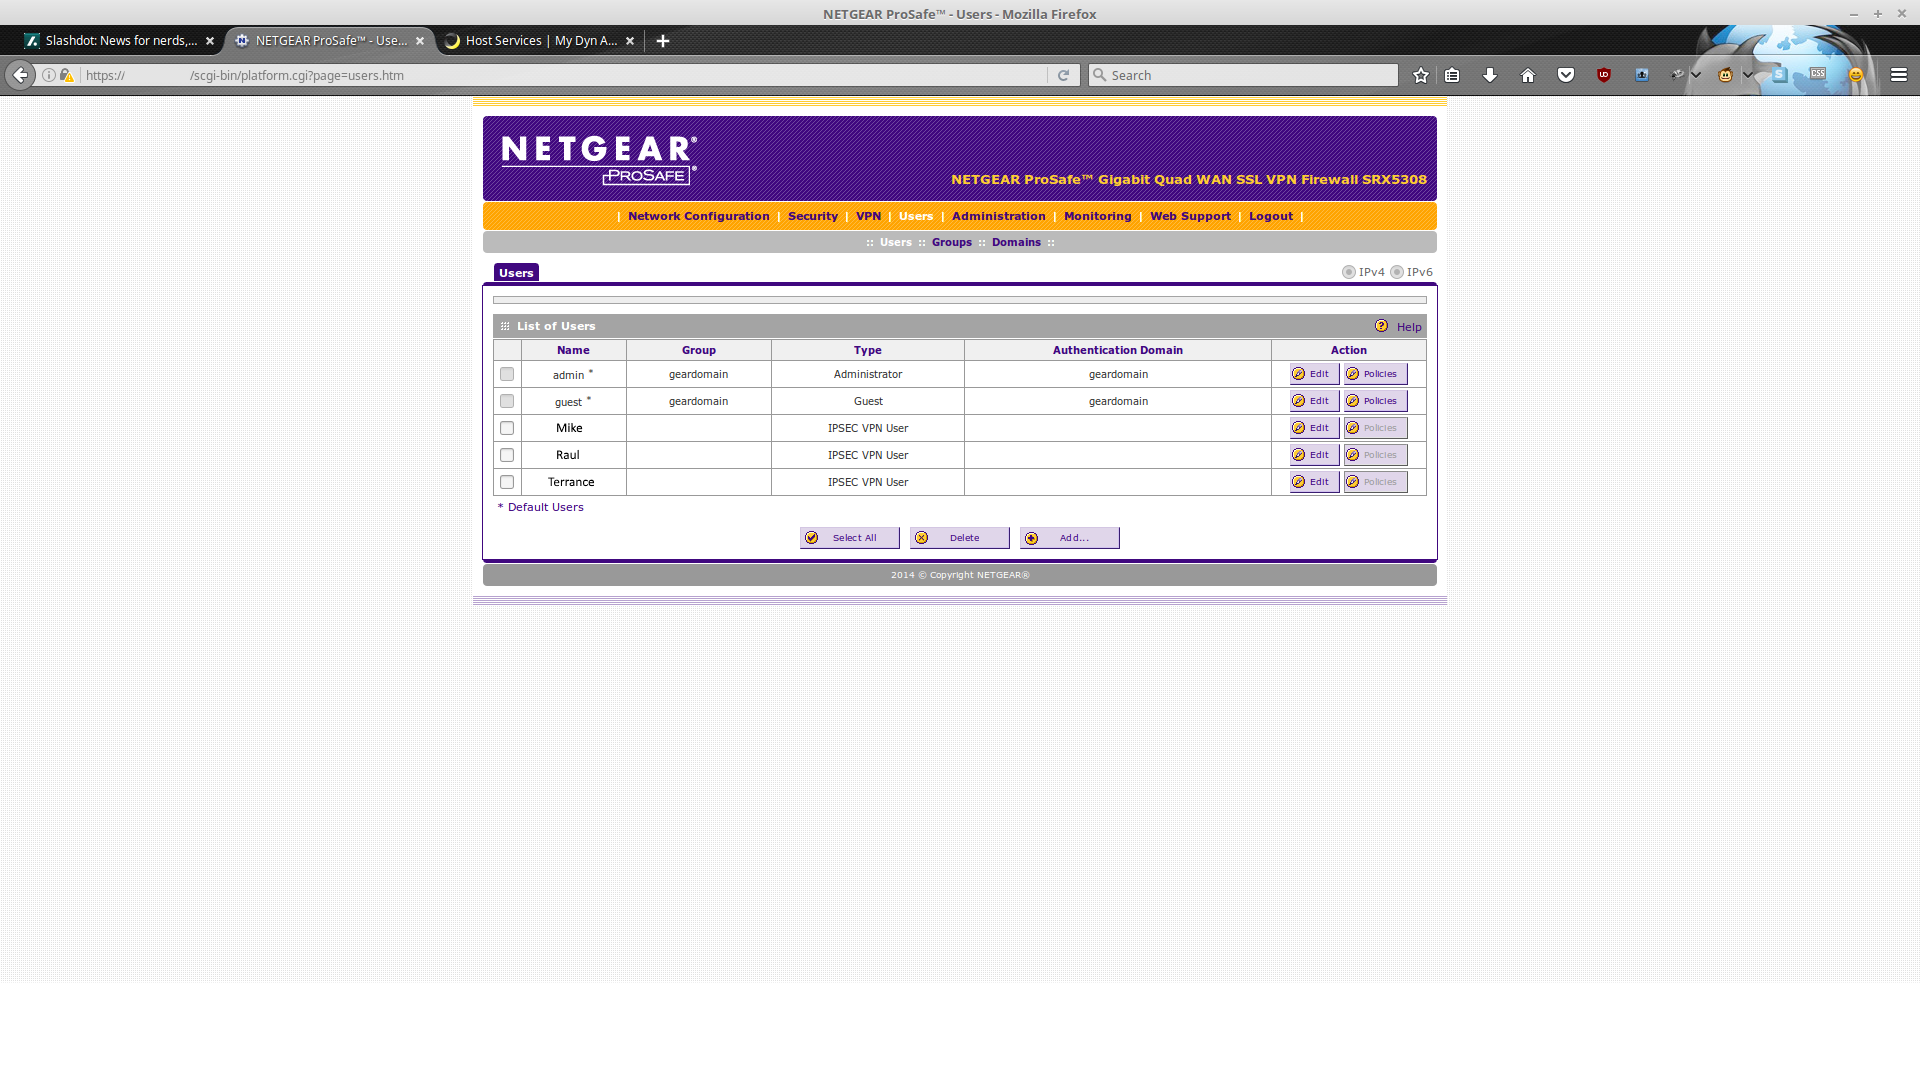 NetGear - Users page.png